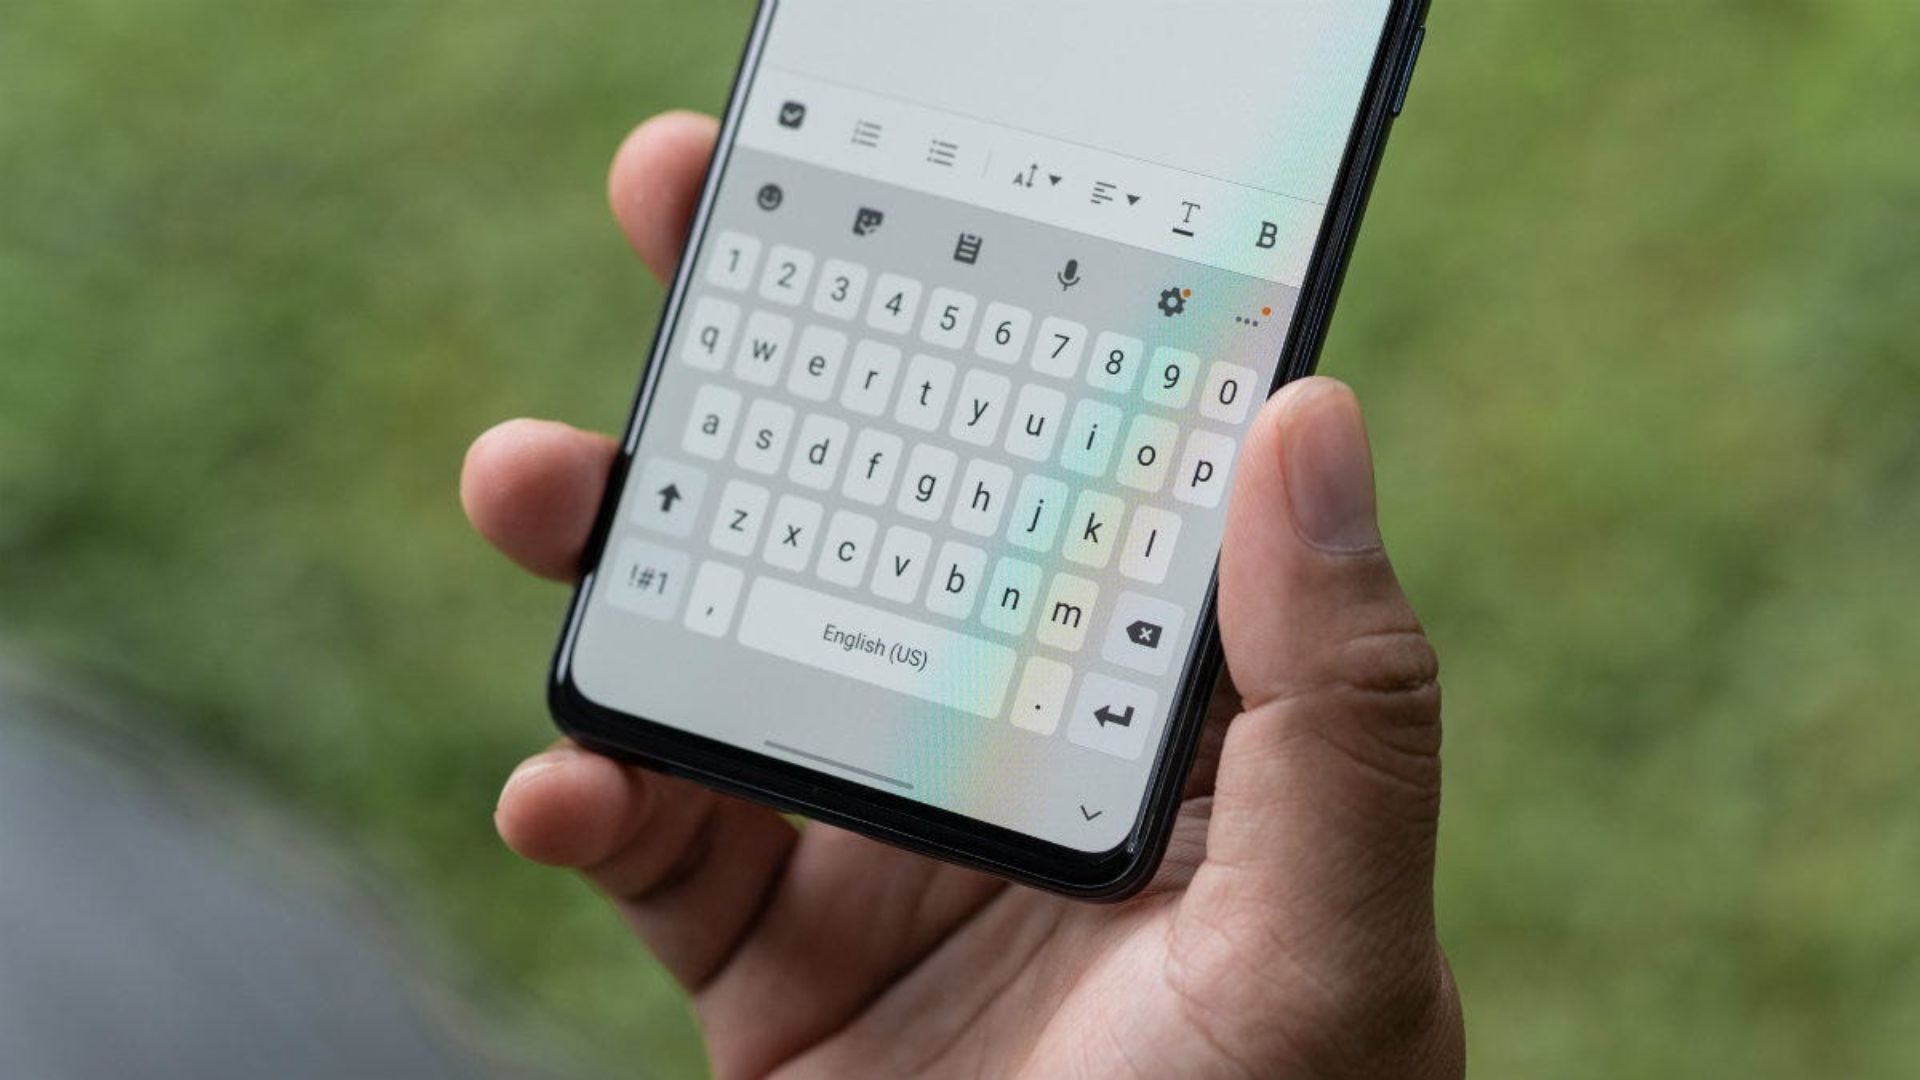 this image shows Android Keyboards